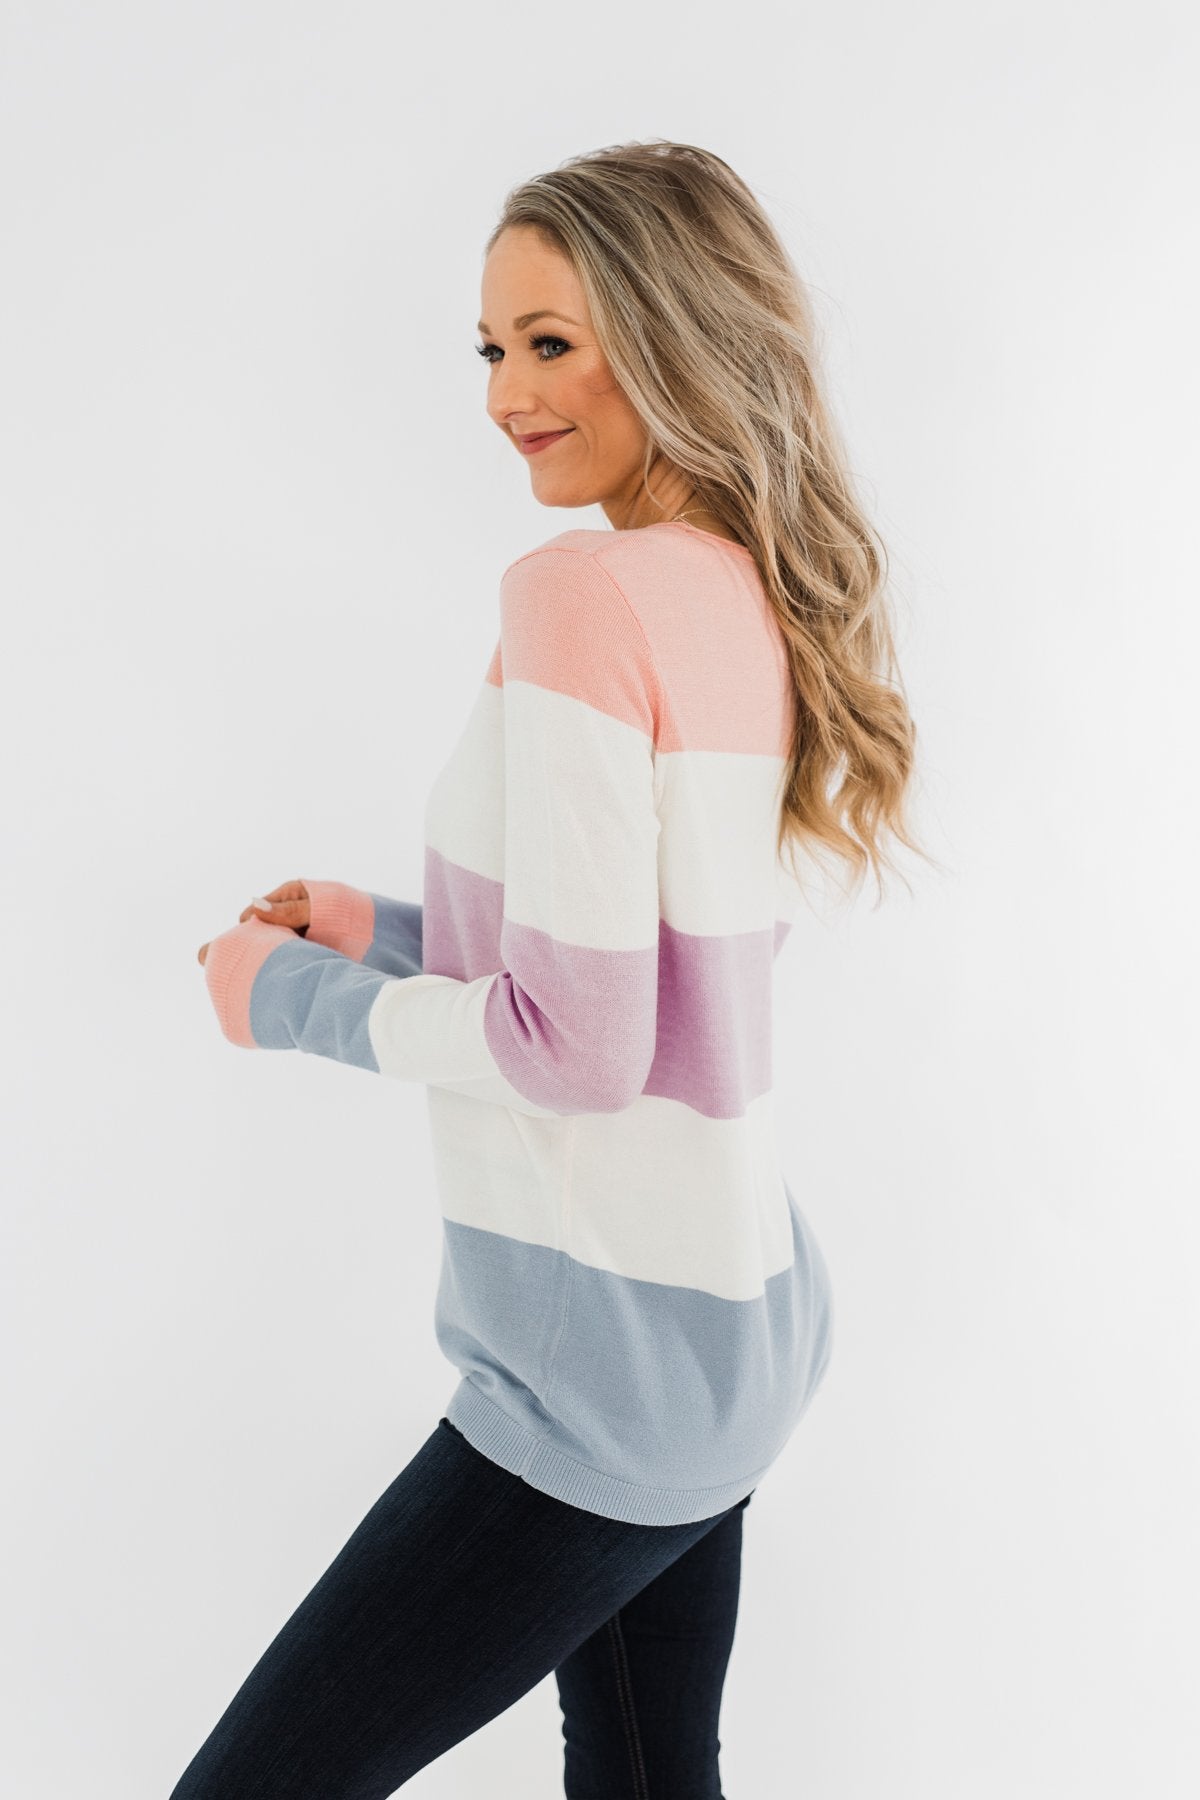 Here She Comes Sweater- Peach, Orchid & Steal Blue – The Pulse Boutique